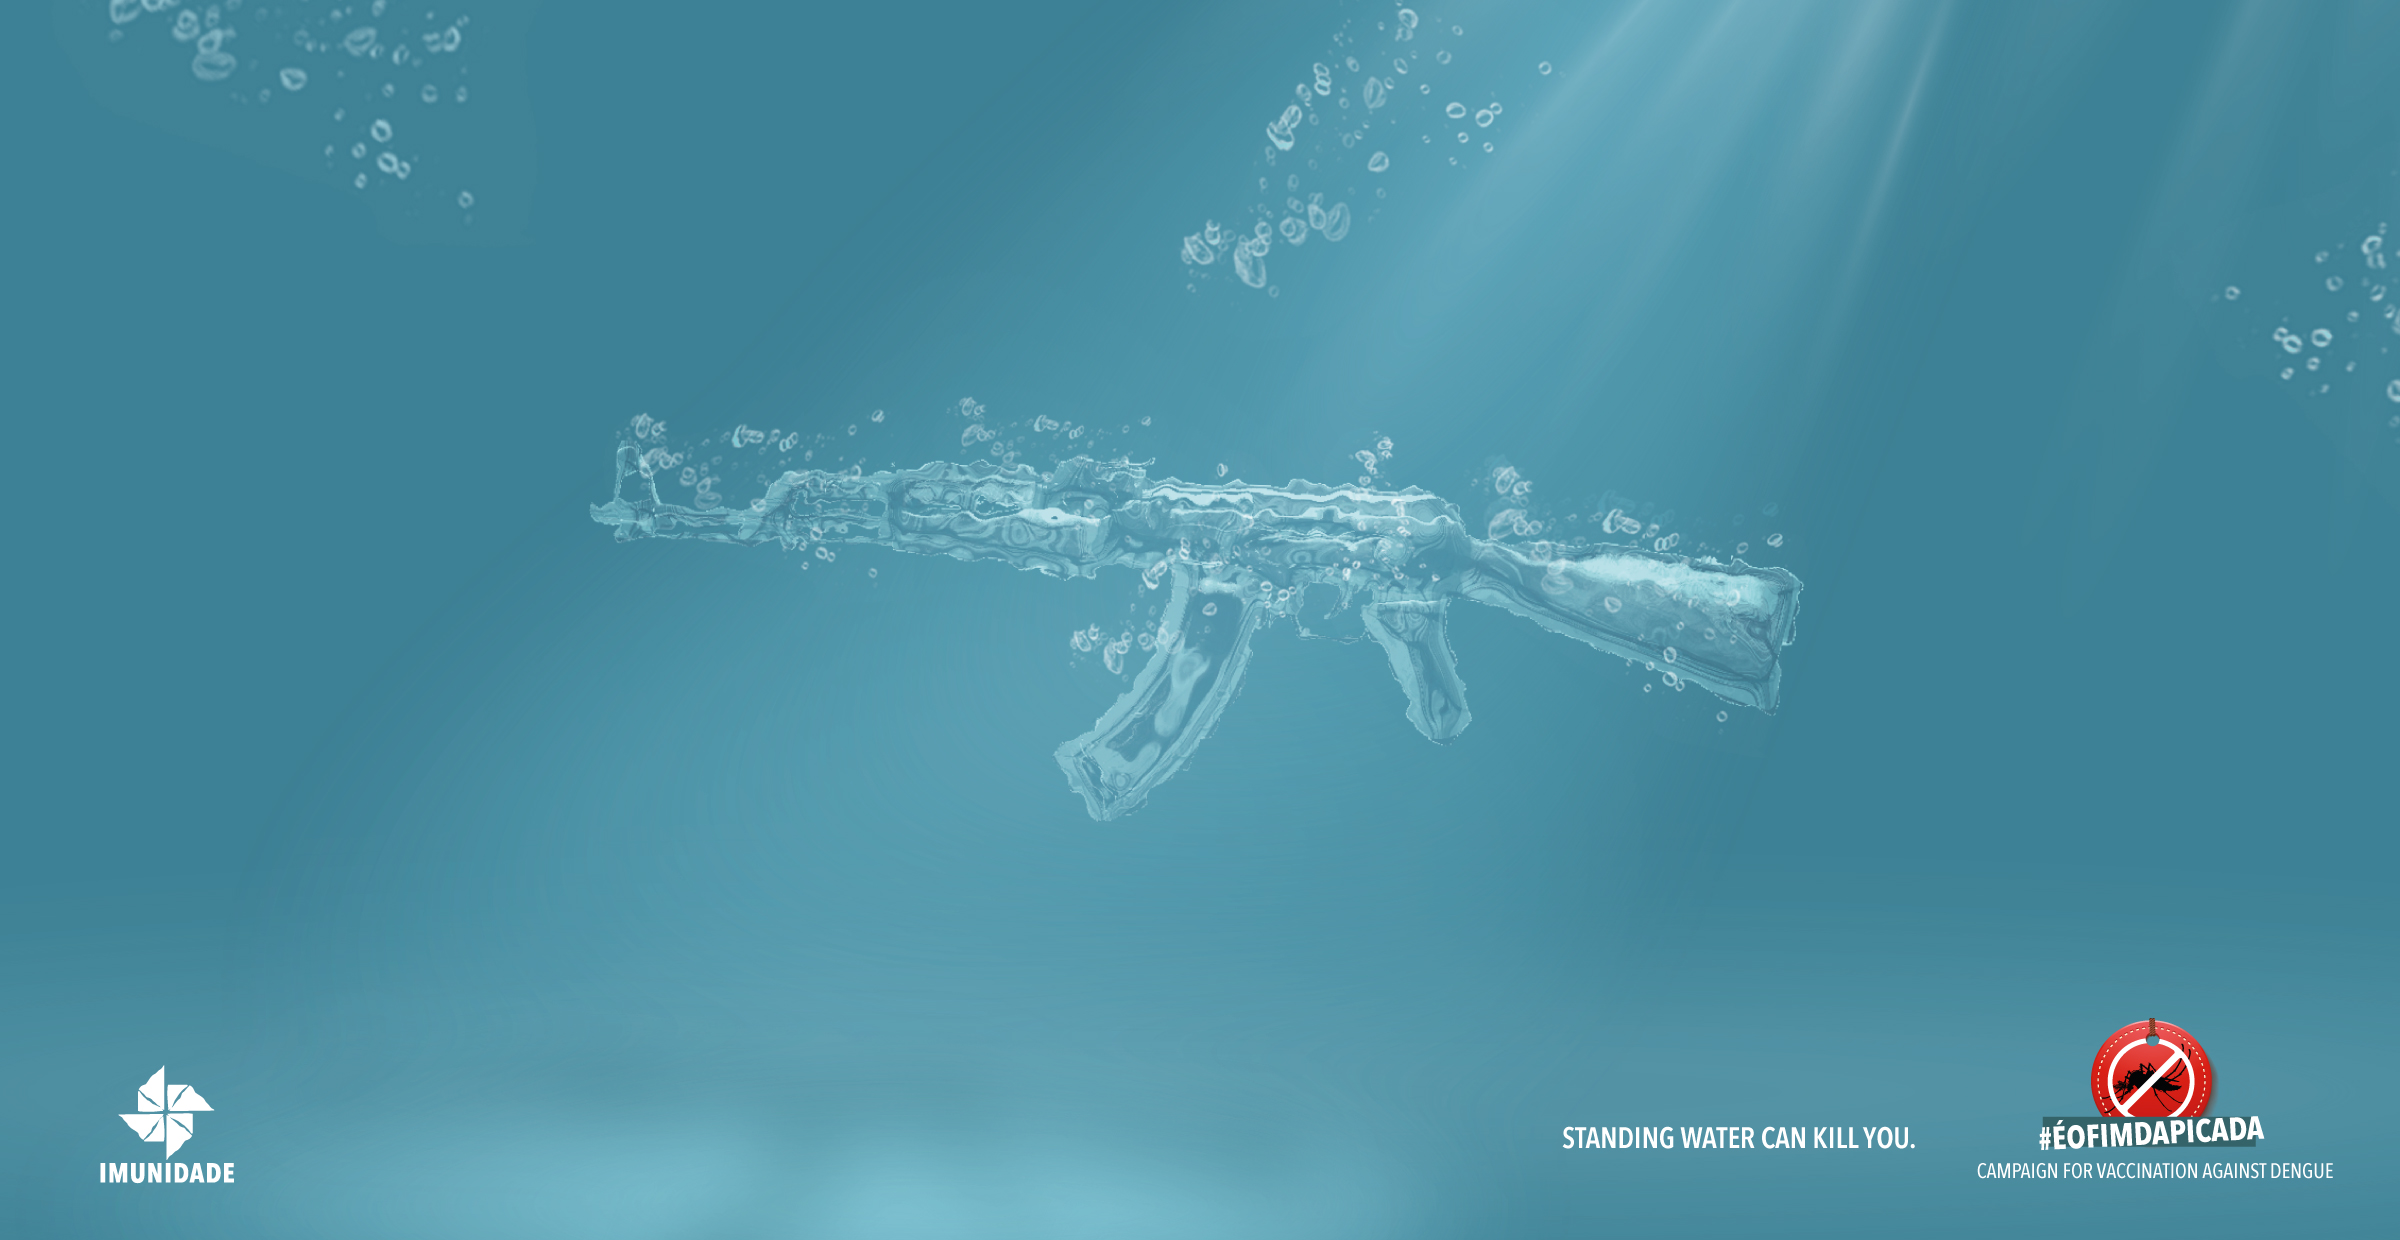 Imunidade - Standing Water Can Kill You | Print Campaign